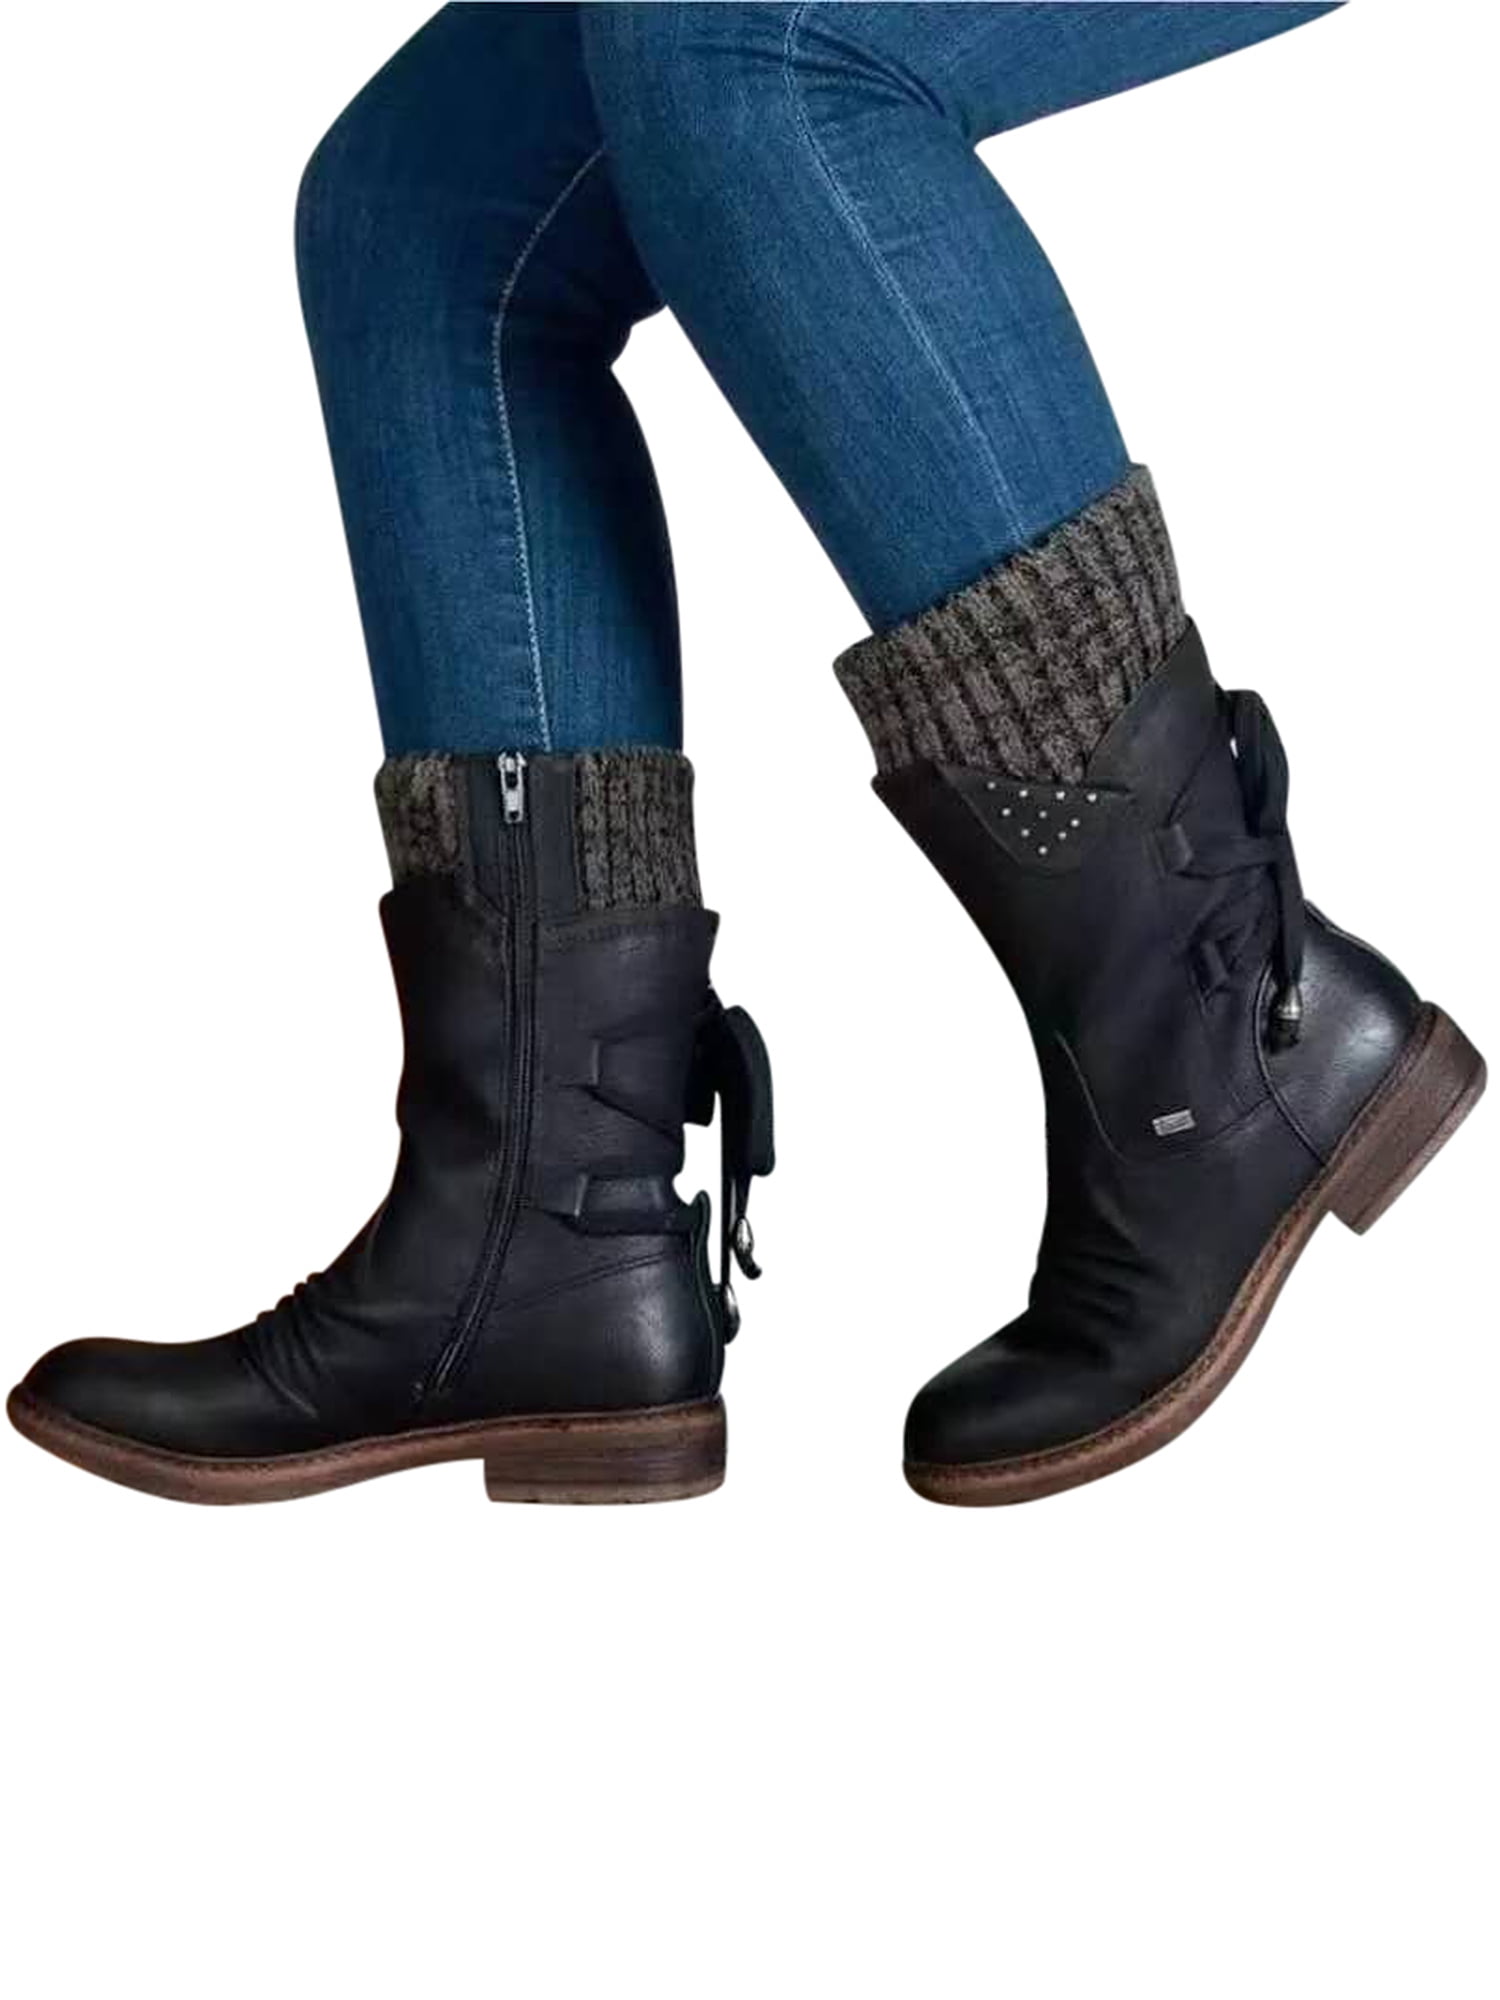 TMA 1384 lined Sizes 36-42 green Winter comfortable boots for women Women/'s boots Genuine leather